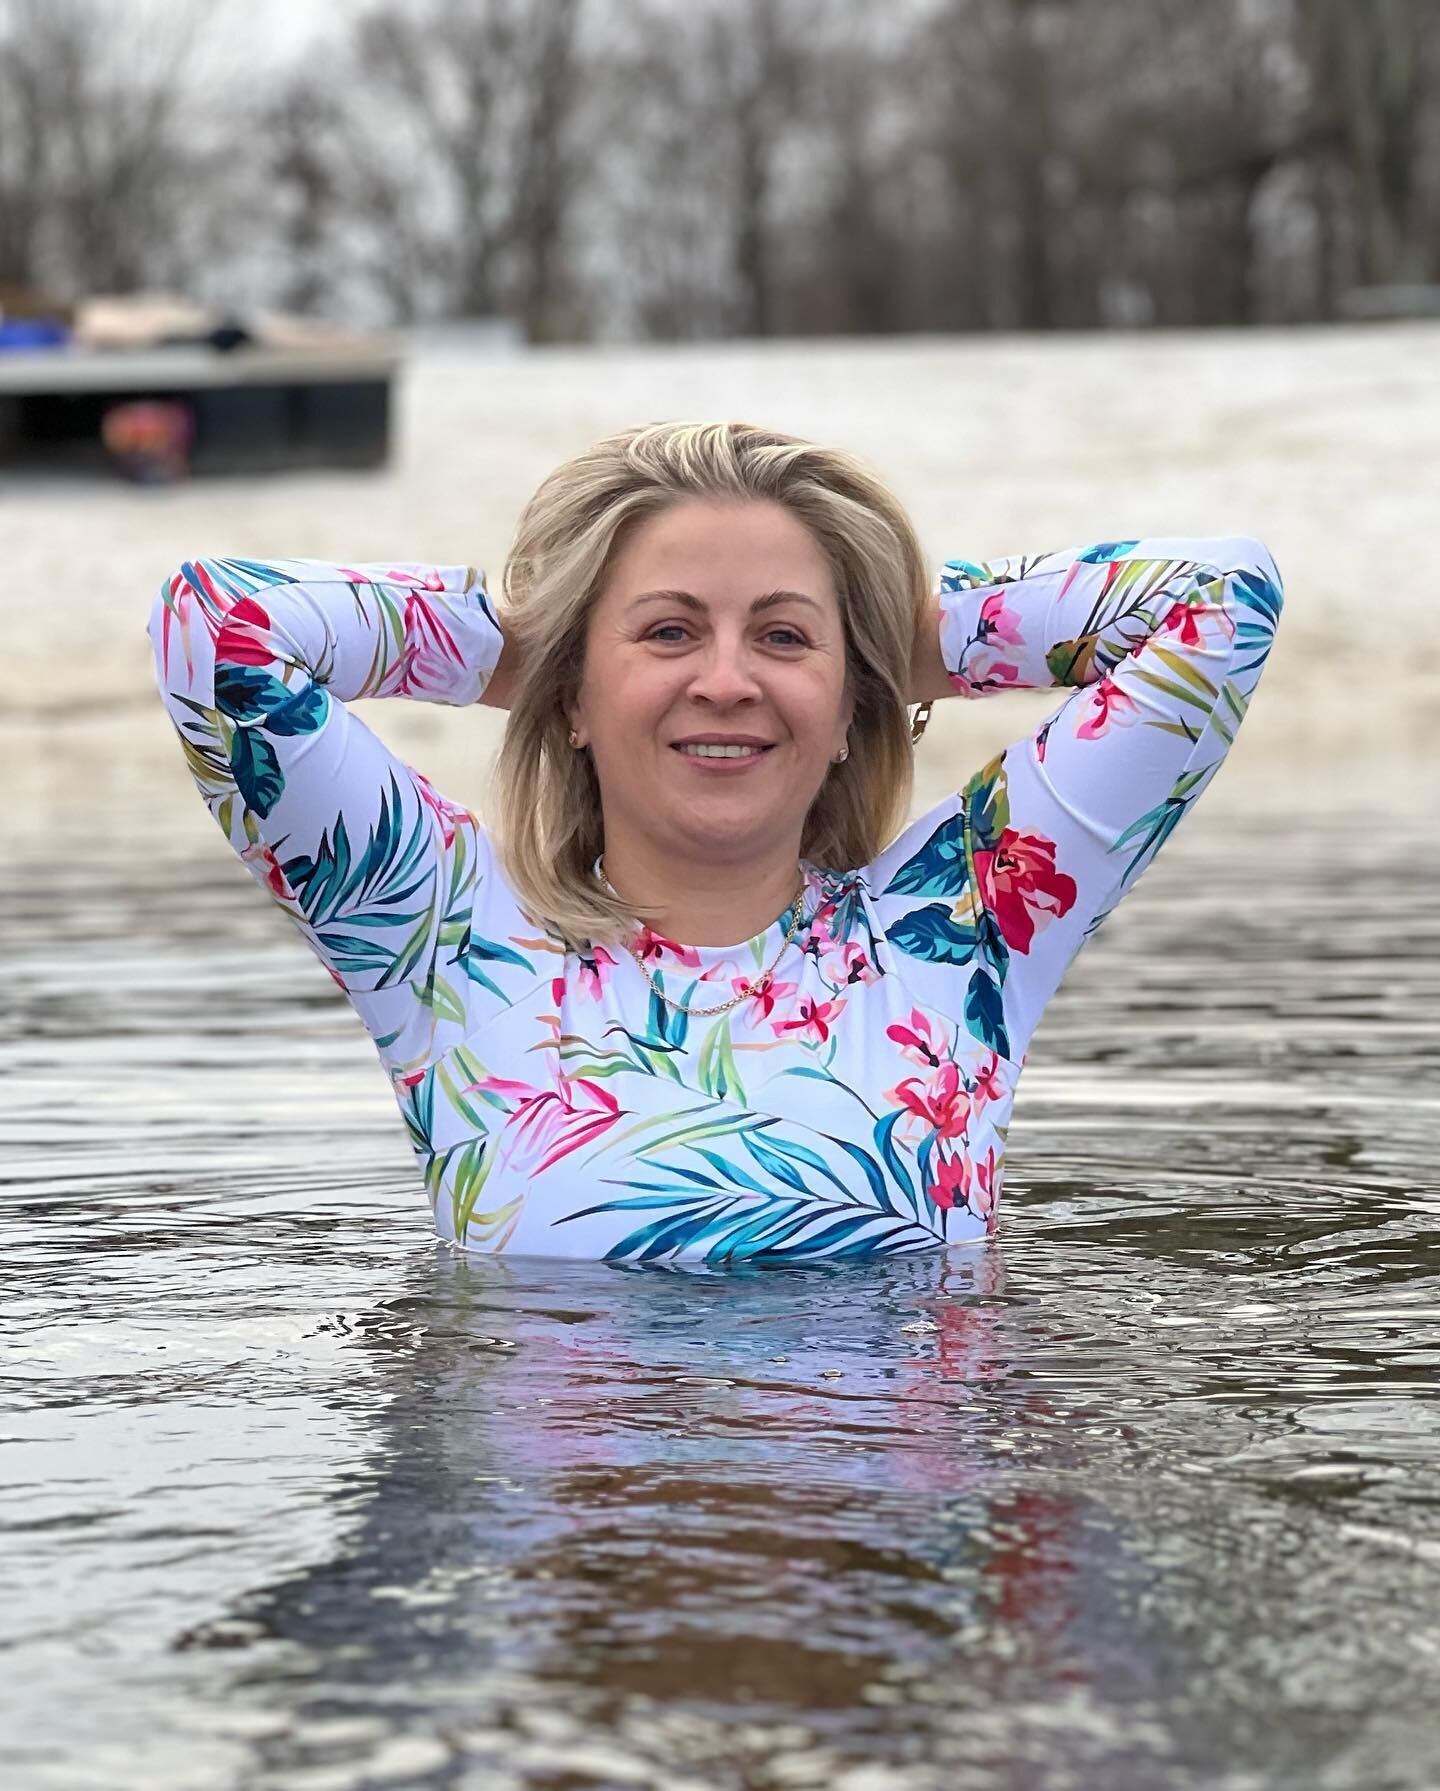 This morning, at 8 A.m. I started off the Cold Plunge season with my friends, at Mount Hope Pond. The water was sooo cold, but the benefits for your skin, well being and immune system have been making me enjoy Plunging for 8 years! If you have any qu